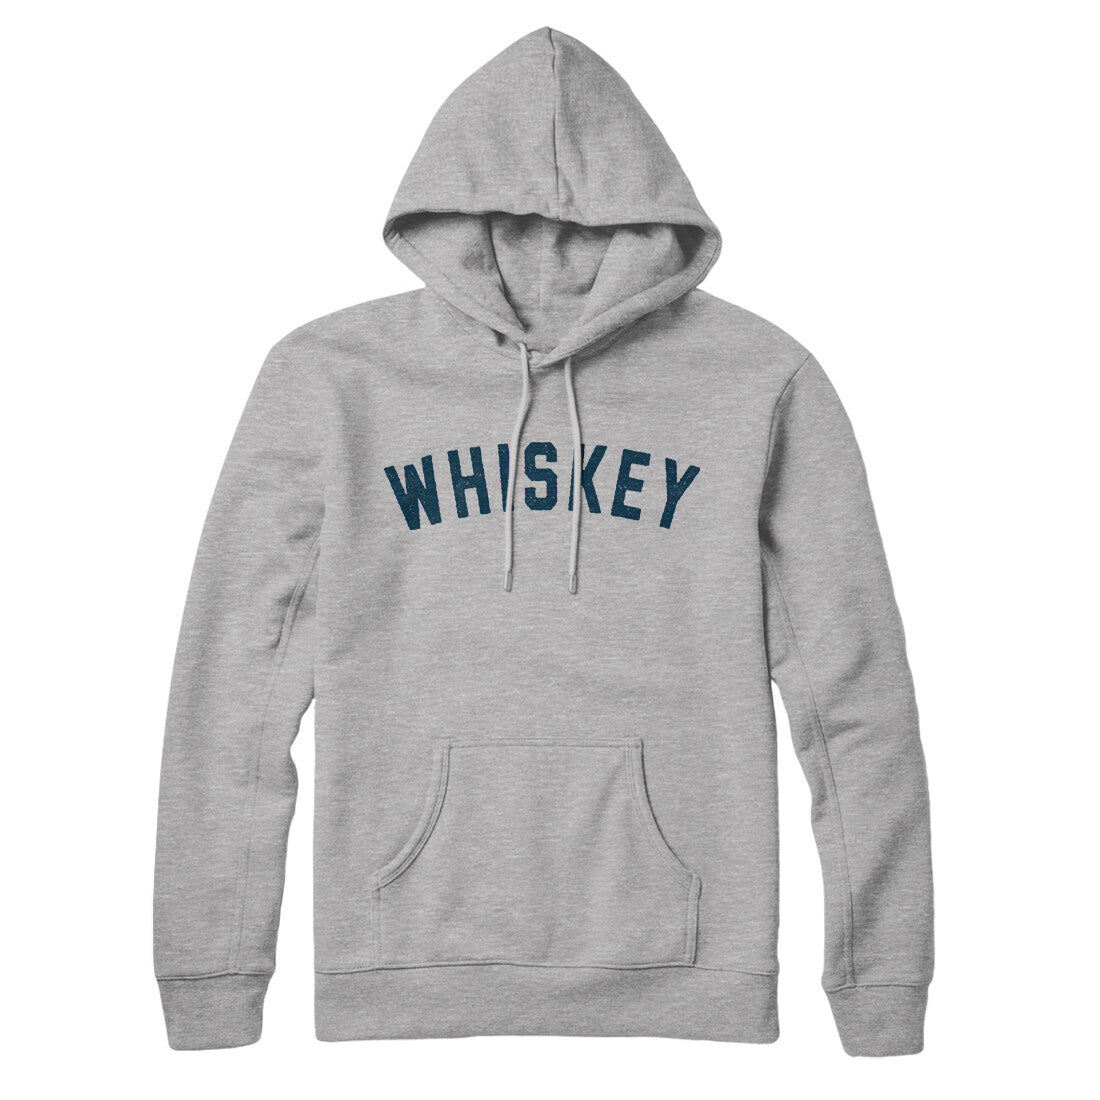 Whiskey in Heather Grey Color